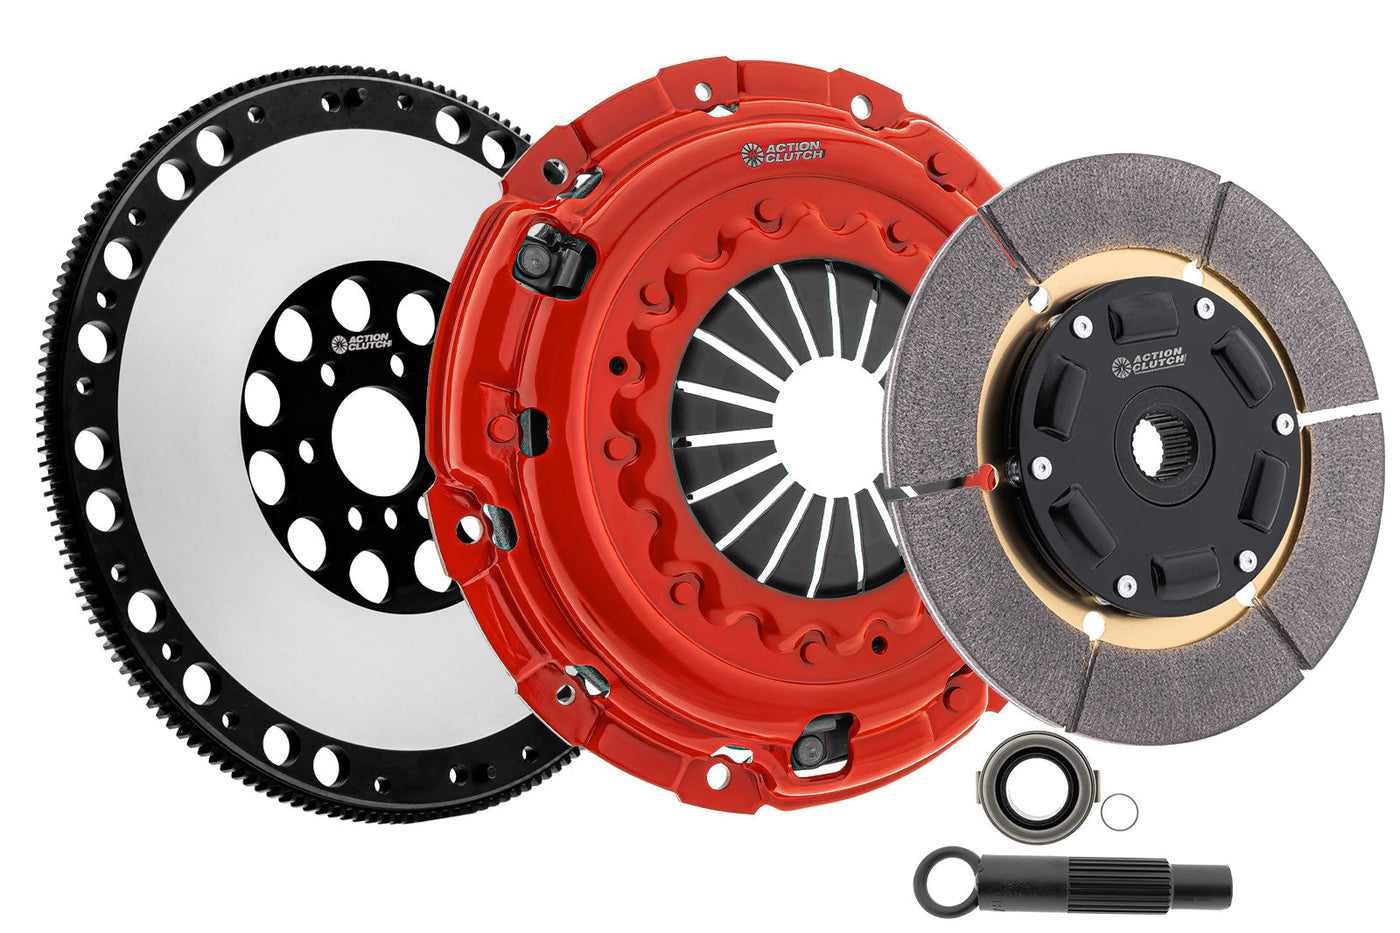 Ironman Sprung (Street) Clutch Kit for Acura RSX 2002-2006 2.0L DOHC (K20A3) Includes Lightened Flywheel